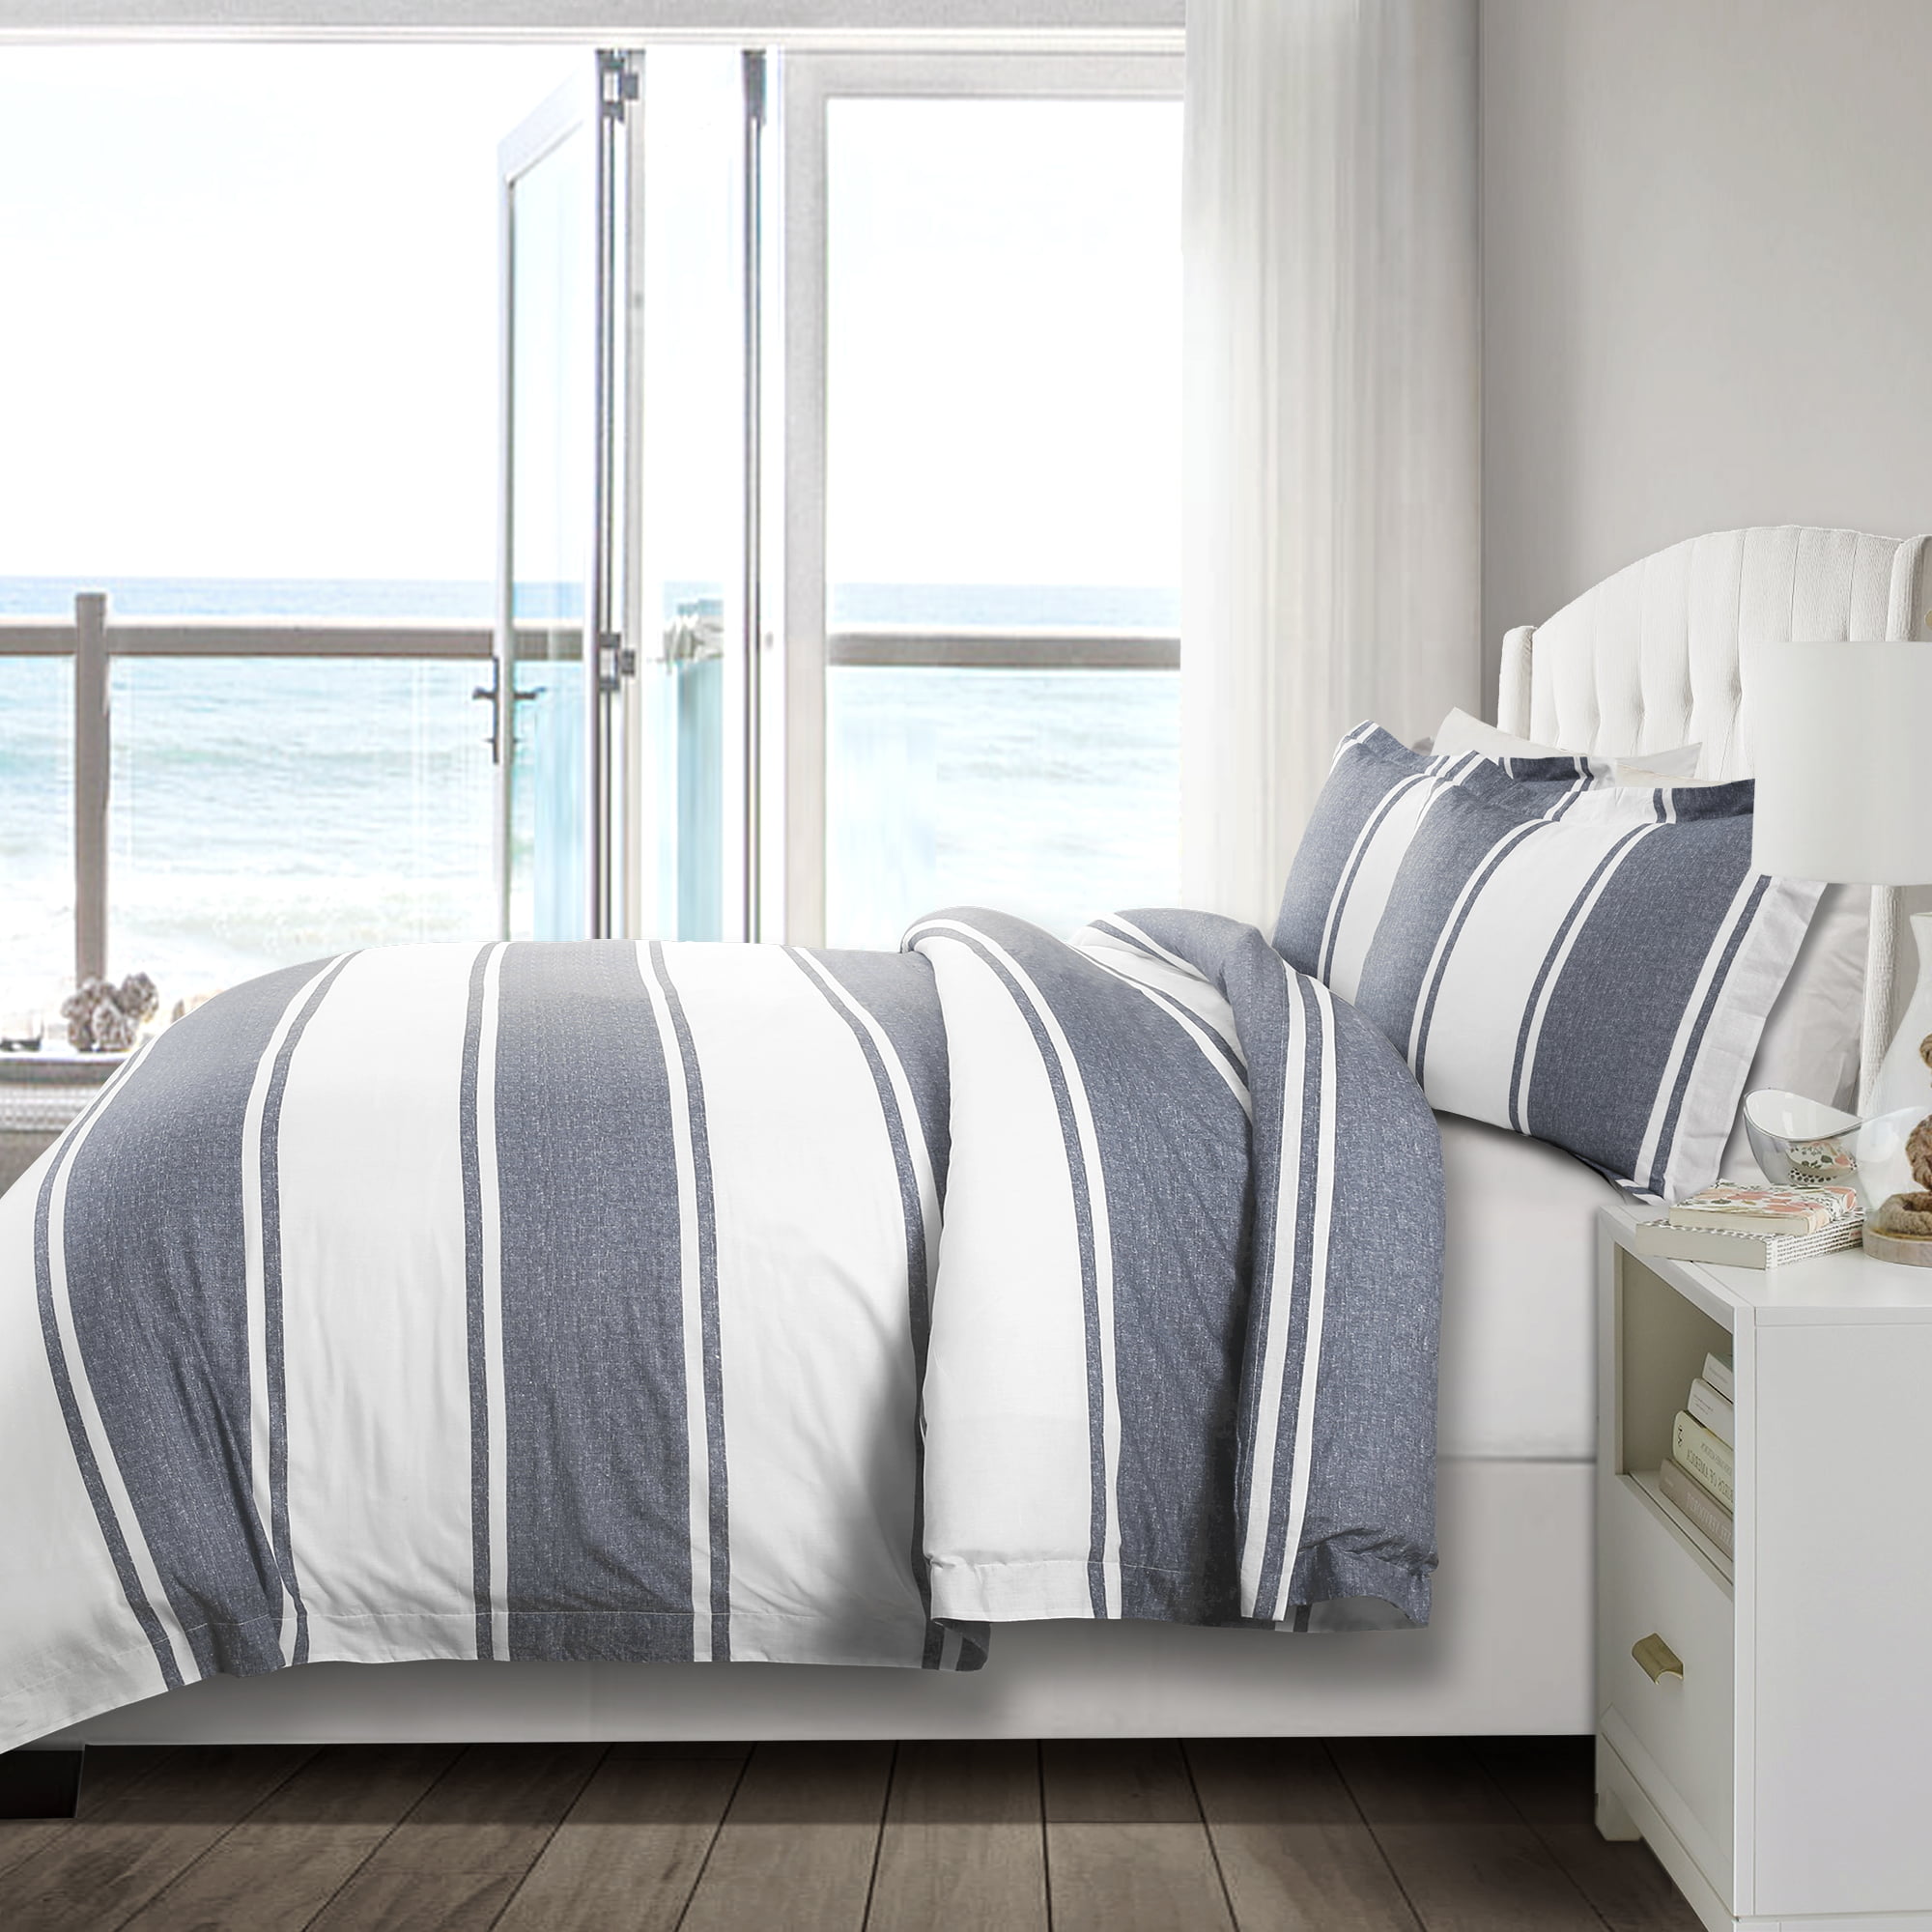 A0156-BT3-K Grey Vertical Ticking Stripes Pattern Printed on White 3pcs, King Size 100% Cotton Bedding with Zipper Closure Gray White Striped Duvet Cover Set J Wake In Cloud